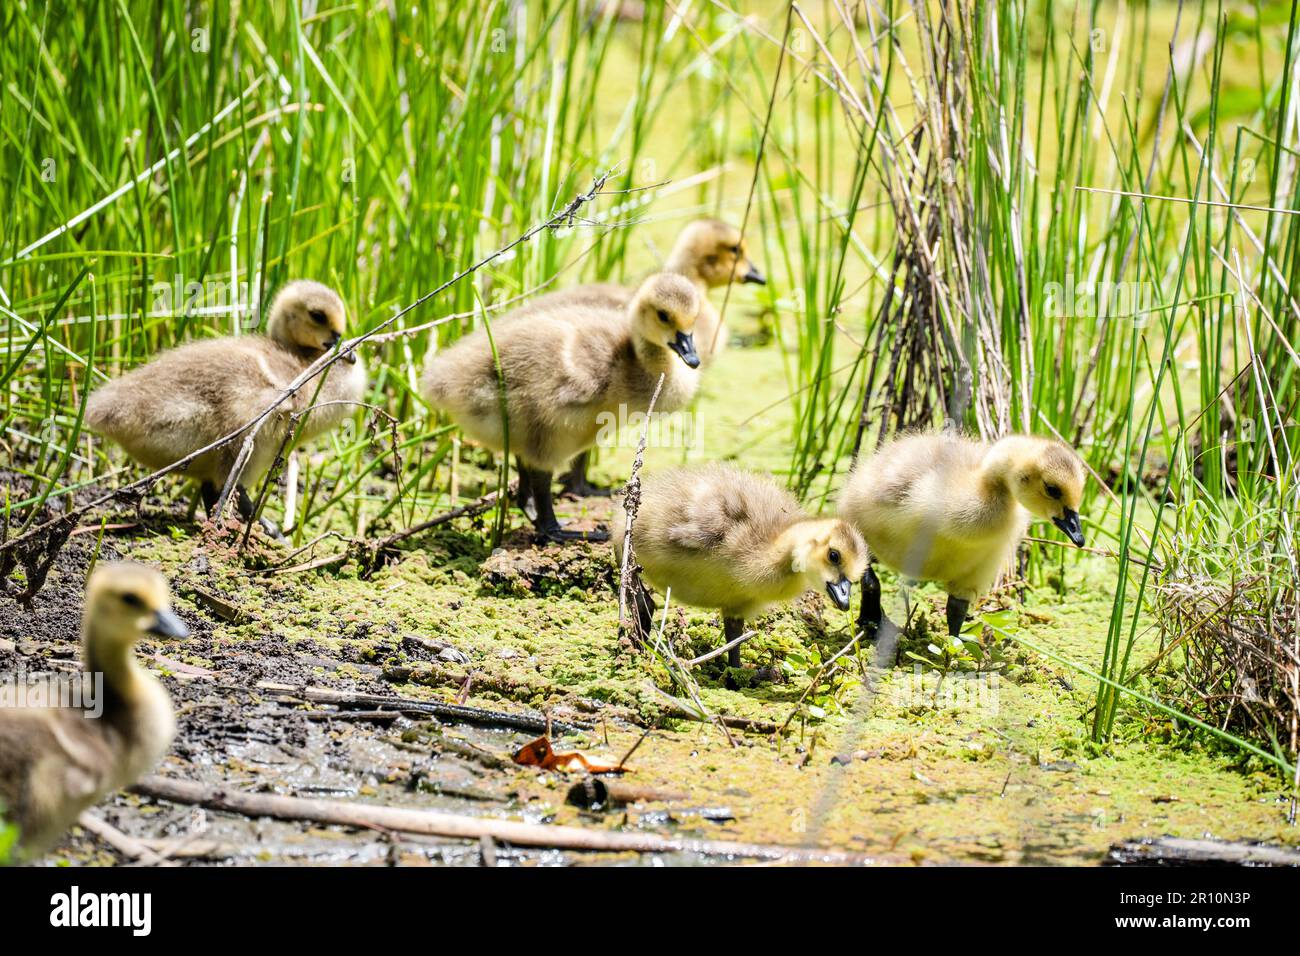 Goslings at the pond close-up Stock Photo